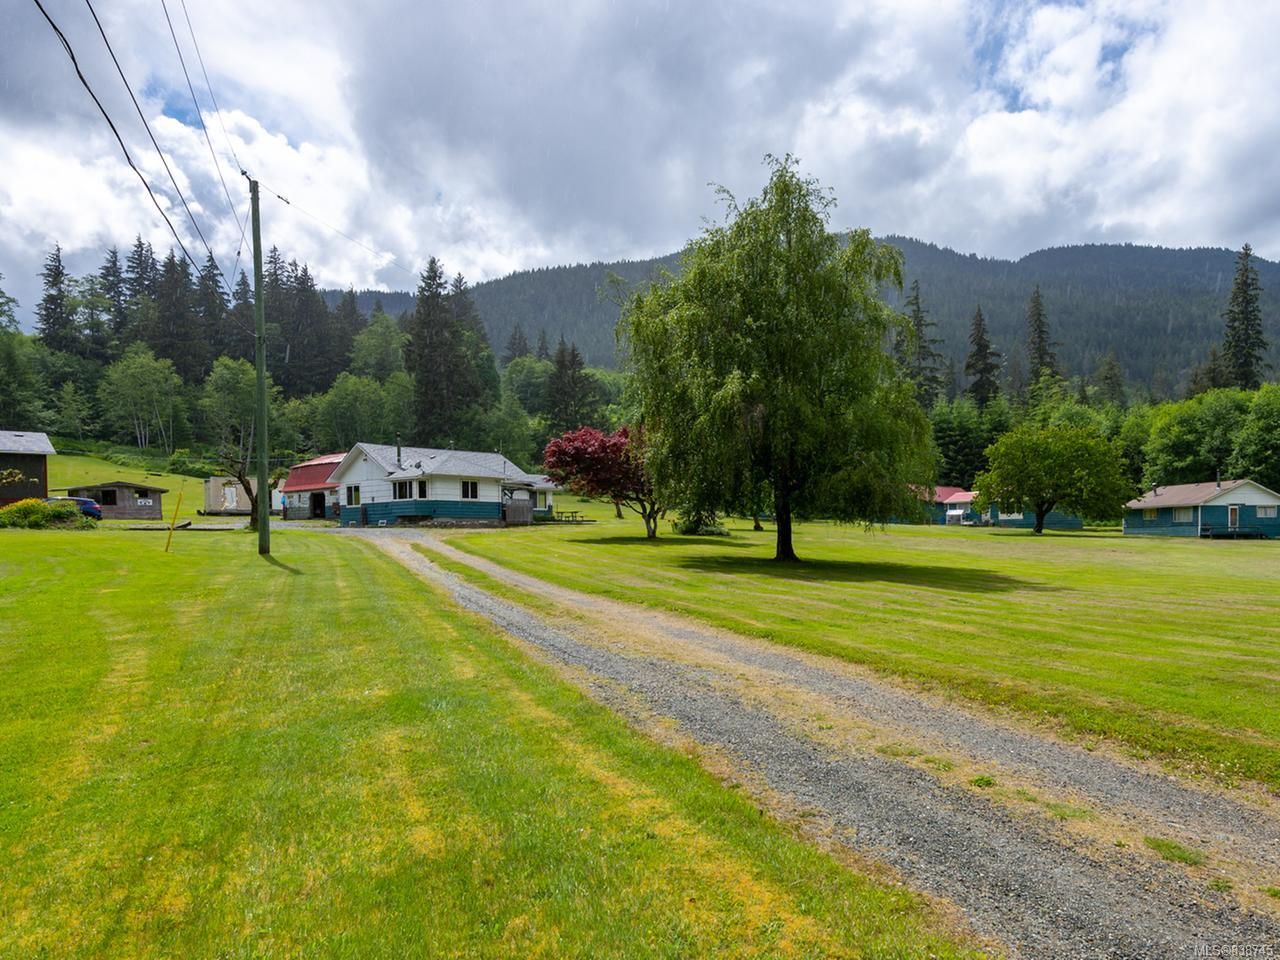 WELCOME TO ELKHAVEN - 989 Frenchman's Road, SAYWARD, B.C.